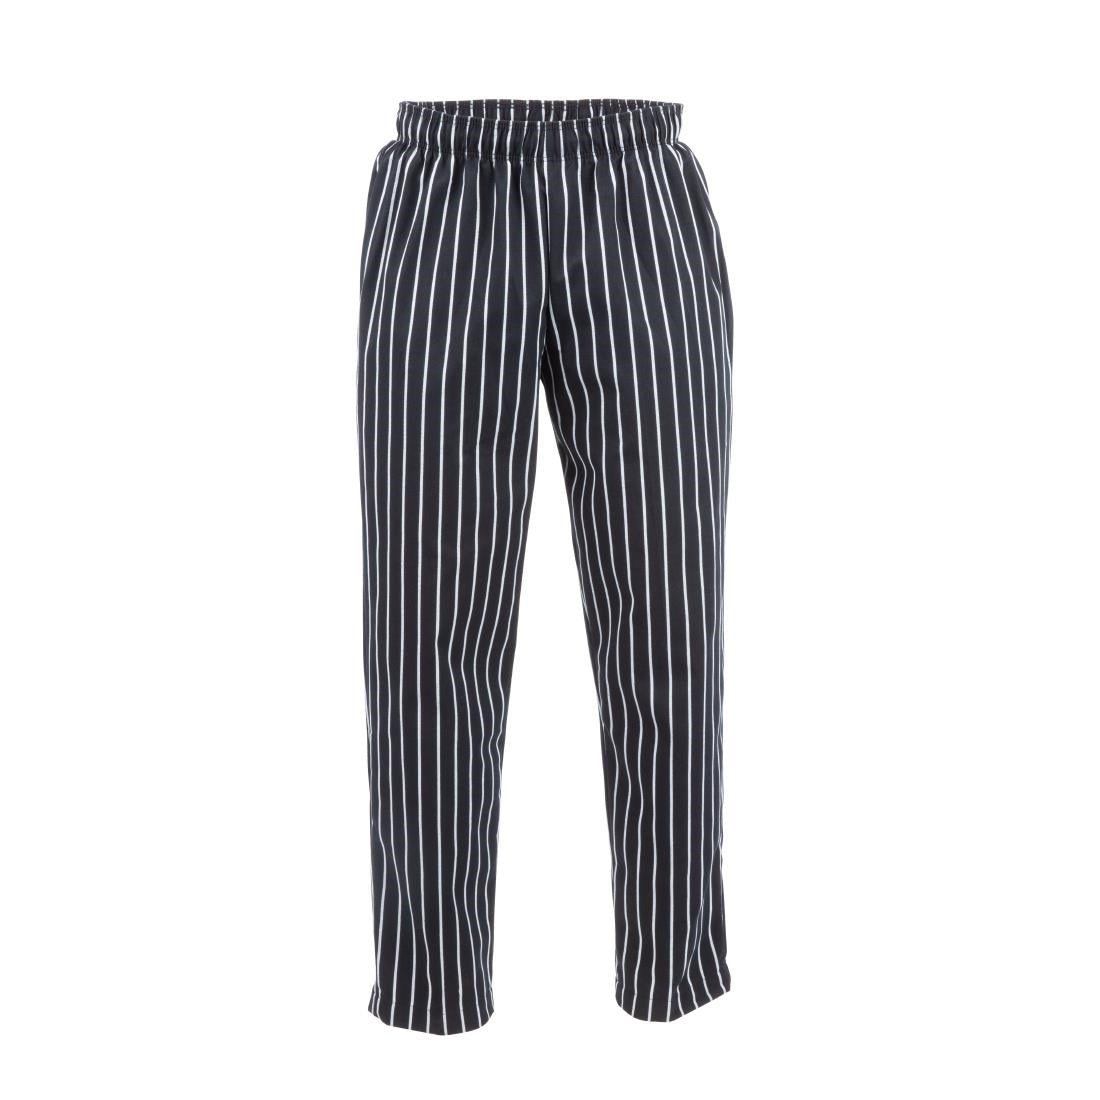 A940-3XL Chef Works Designer Baggy Pant Chalk Stripe 3XL JD Catering Equipment Solutions Ltd